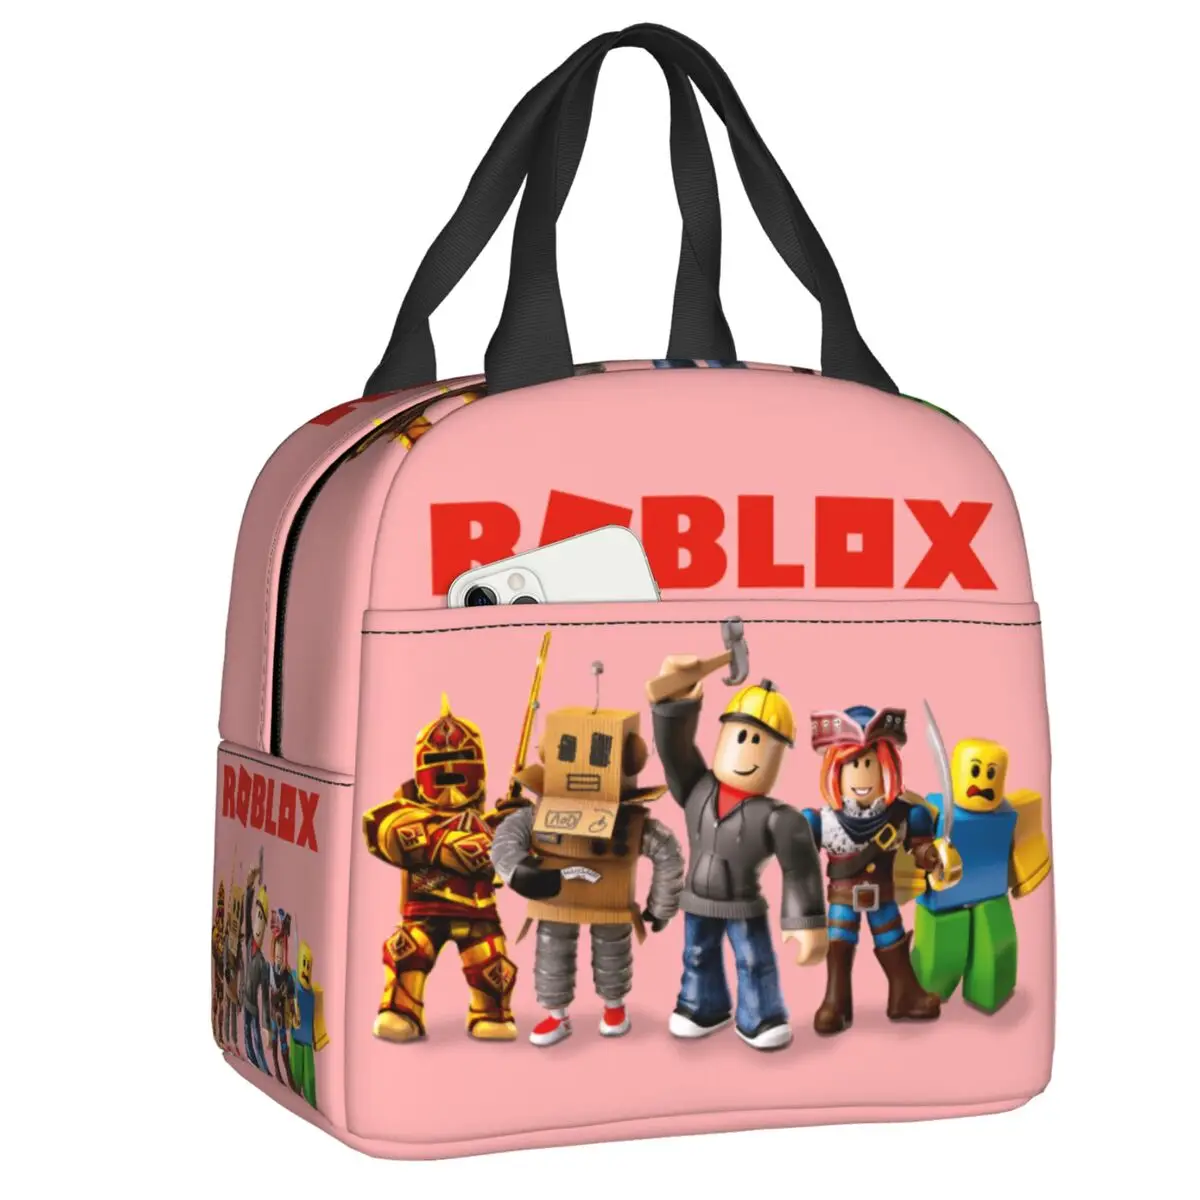 Cartoon Robot Game Robloxs Insulated Lunch Bag for Work School Picnic Resuable Cooler Thermal Bento Box Women Children Food Bags